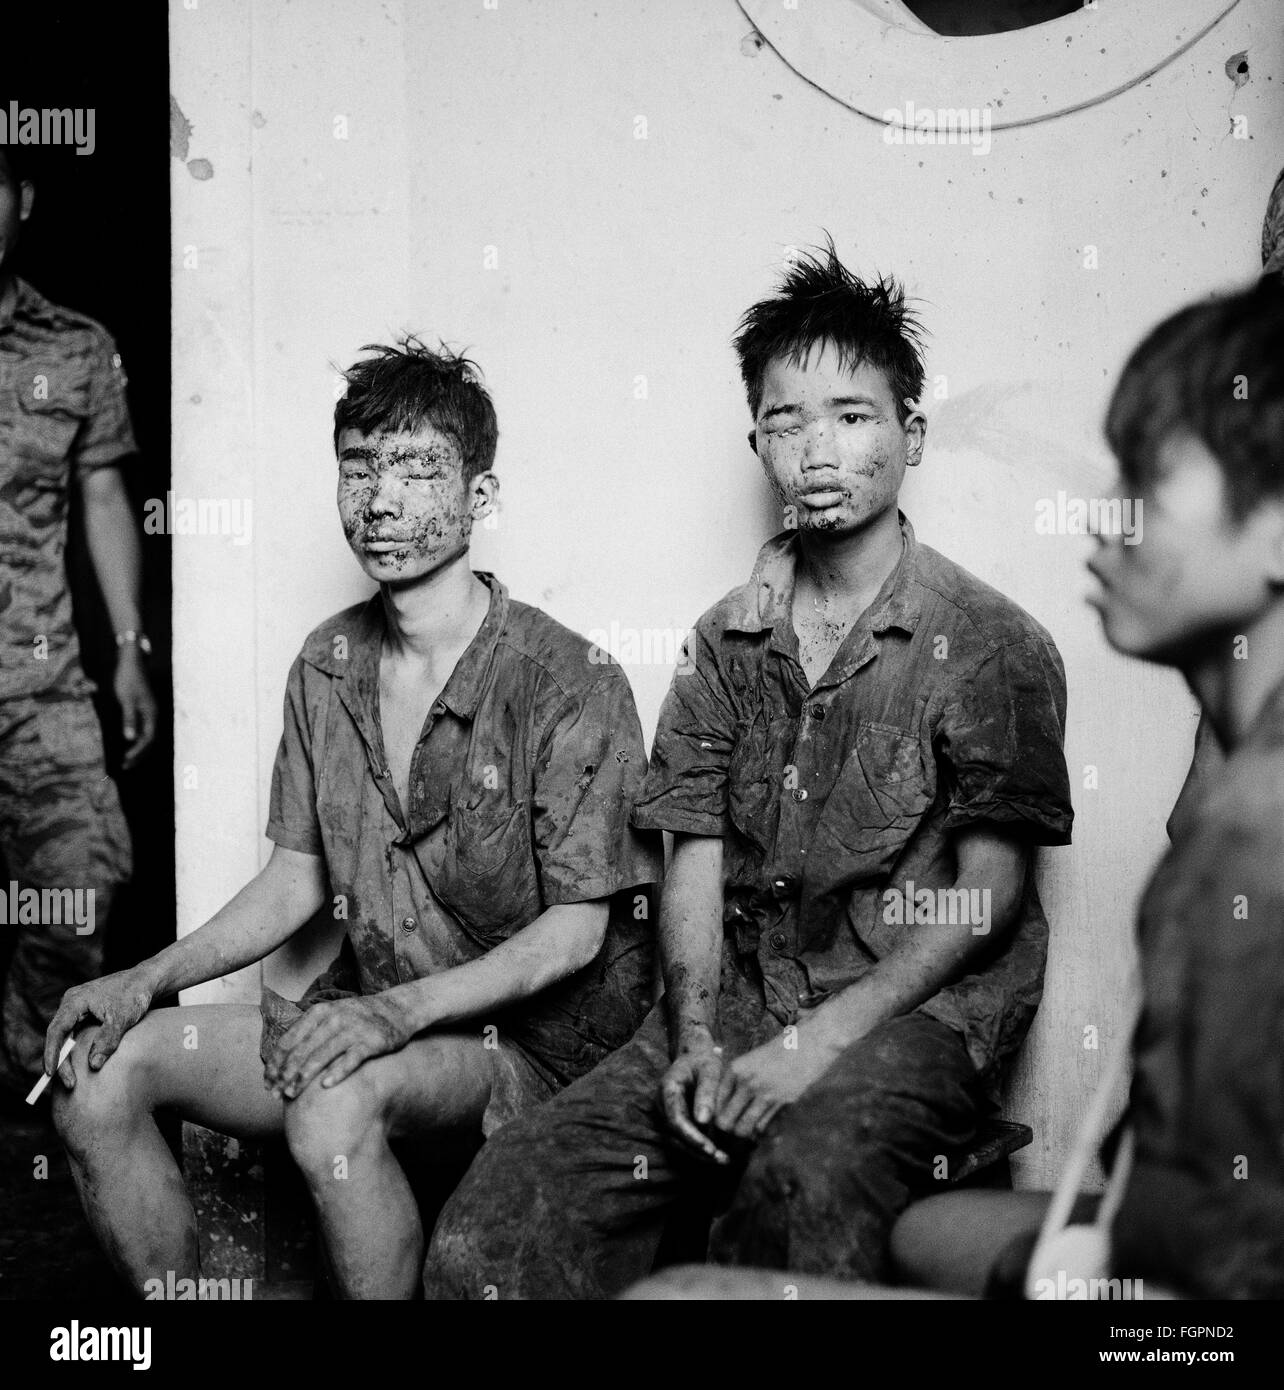 Vietnam War, two captured, wounded North-Vietnamese soldiers, 1972, Additional-Rights-Clearences-Not Available Stock Photo